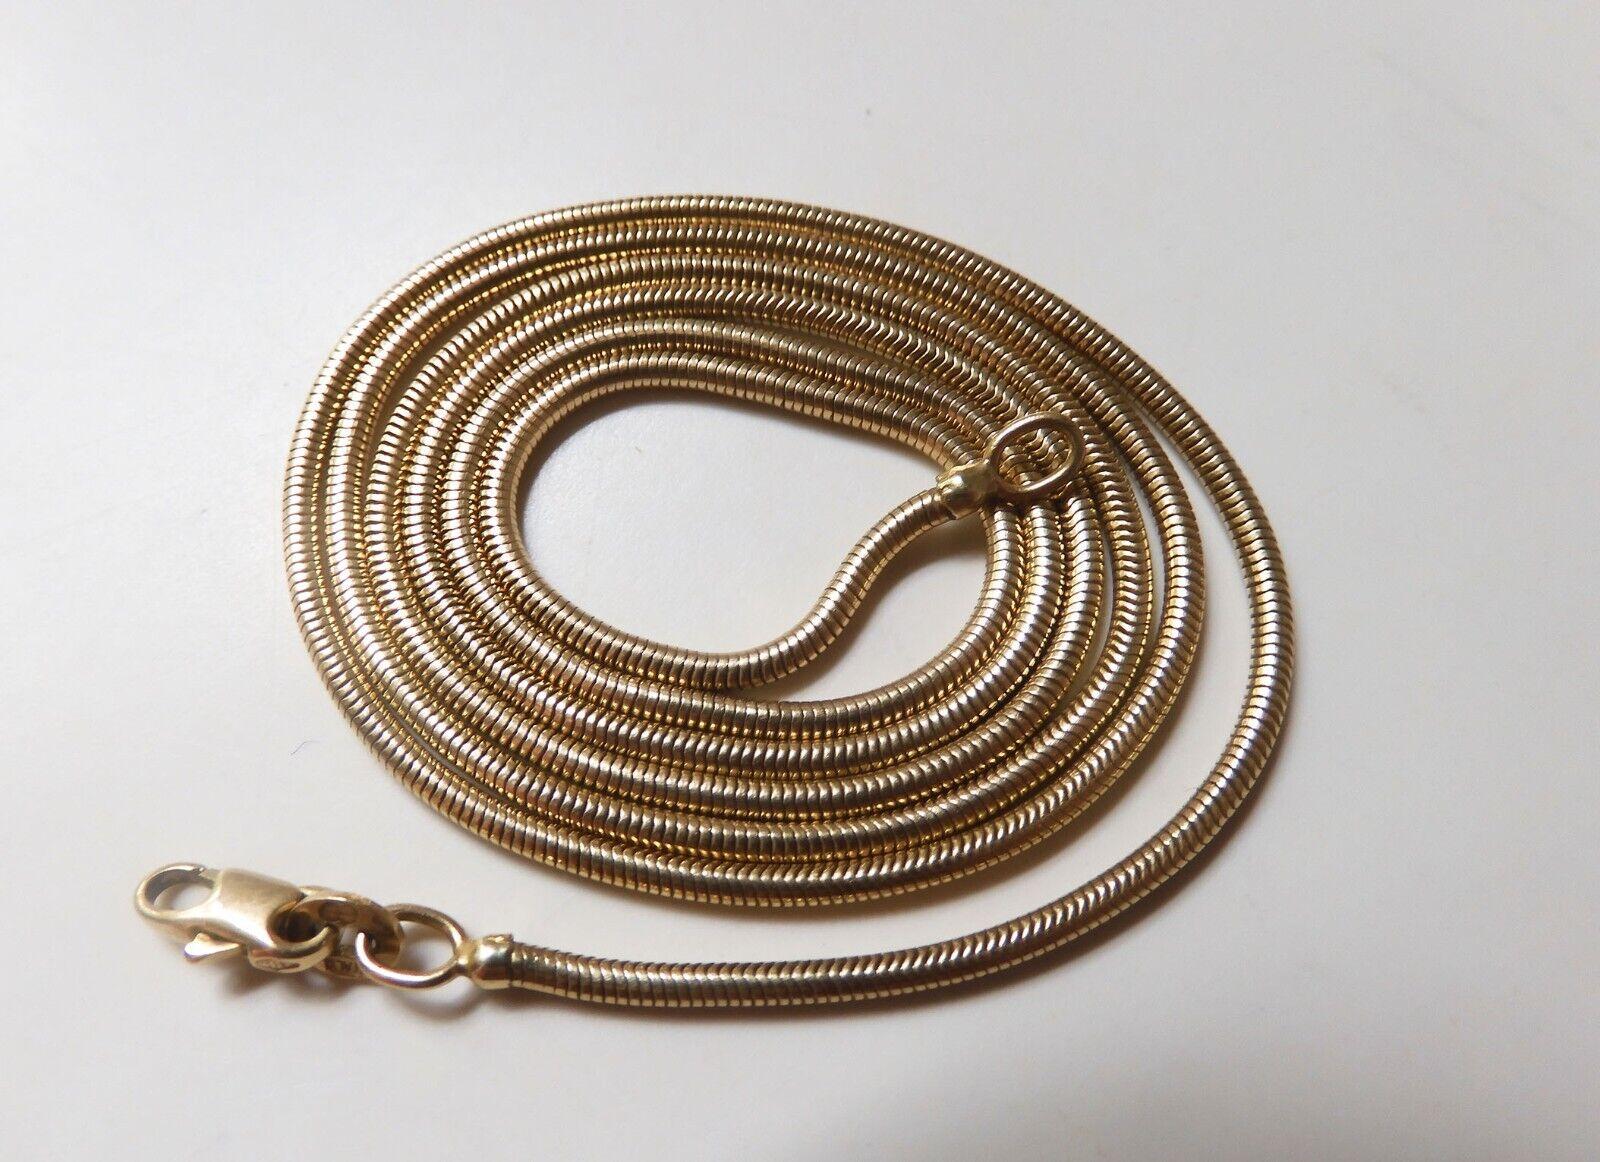 Here is your chance to purchase a beautiful and highly collectible designer snake chain necklace.  

Silky Vintage Unoaerre 14K Yellow Gold 24 Inch Snake Chain Necklace 11.8 Gramsindividual 

This well-made vintage Unoaerre snake chain necklace has